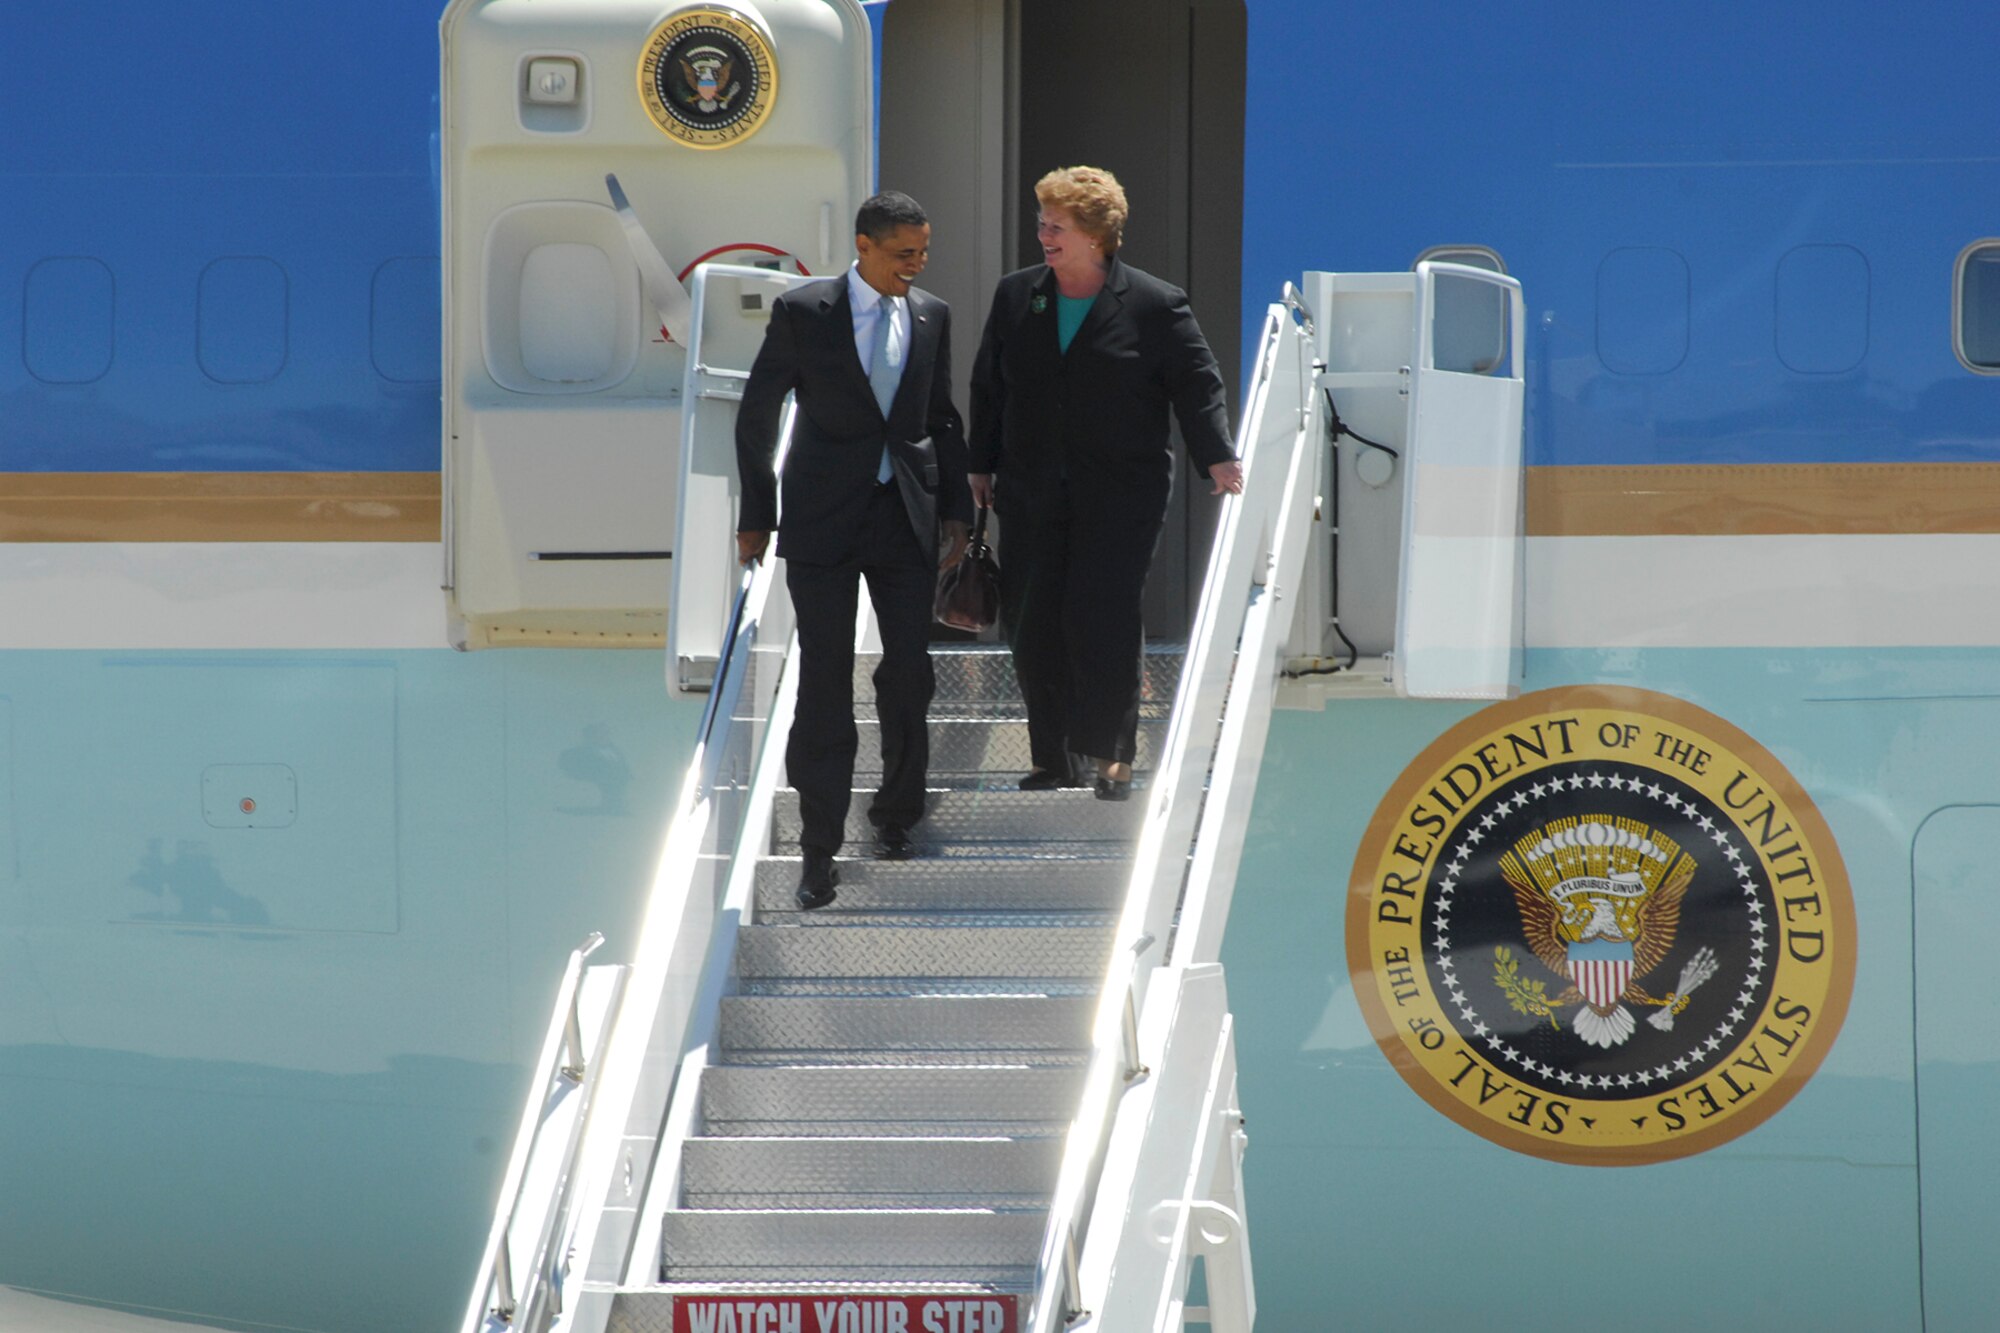 President Barack Obama and Michigan Senator Debbie Stabenow step off Air Force One on Tuesday, July 14, at Selfridge Air National Guard Base, Mich.  The President was in Michigan on his way to a public appearance at Macomb County Community College in Warren, Mich., where he announced his American Graduation Initiative.  (USAF photo by John S. Swanson)